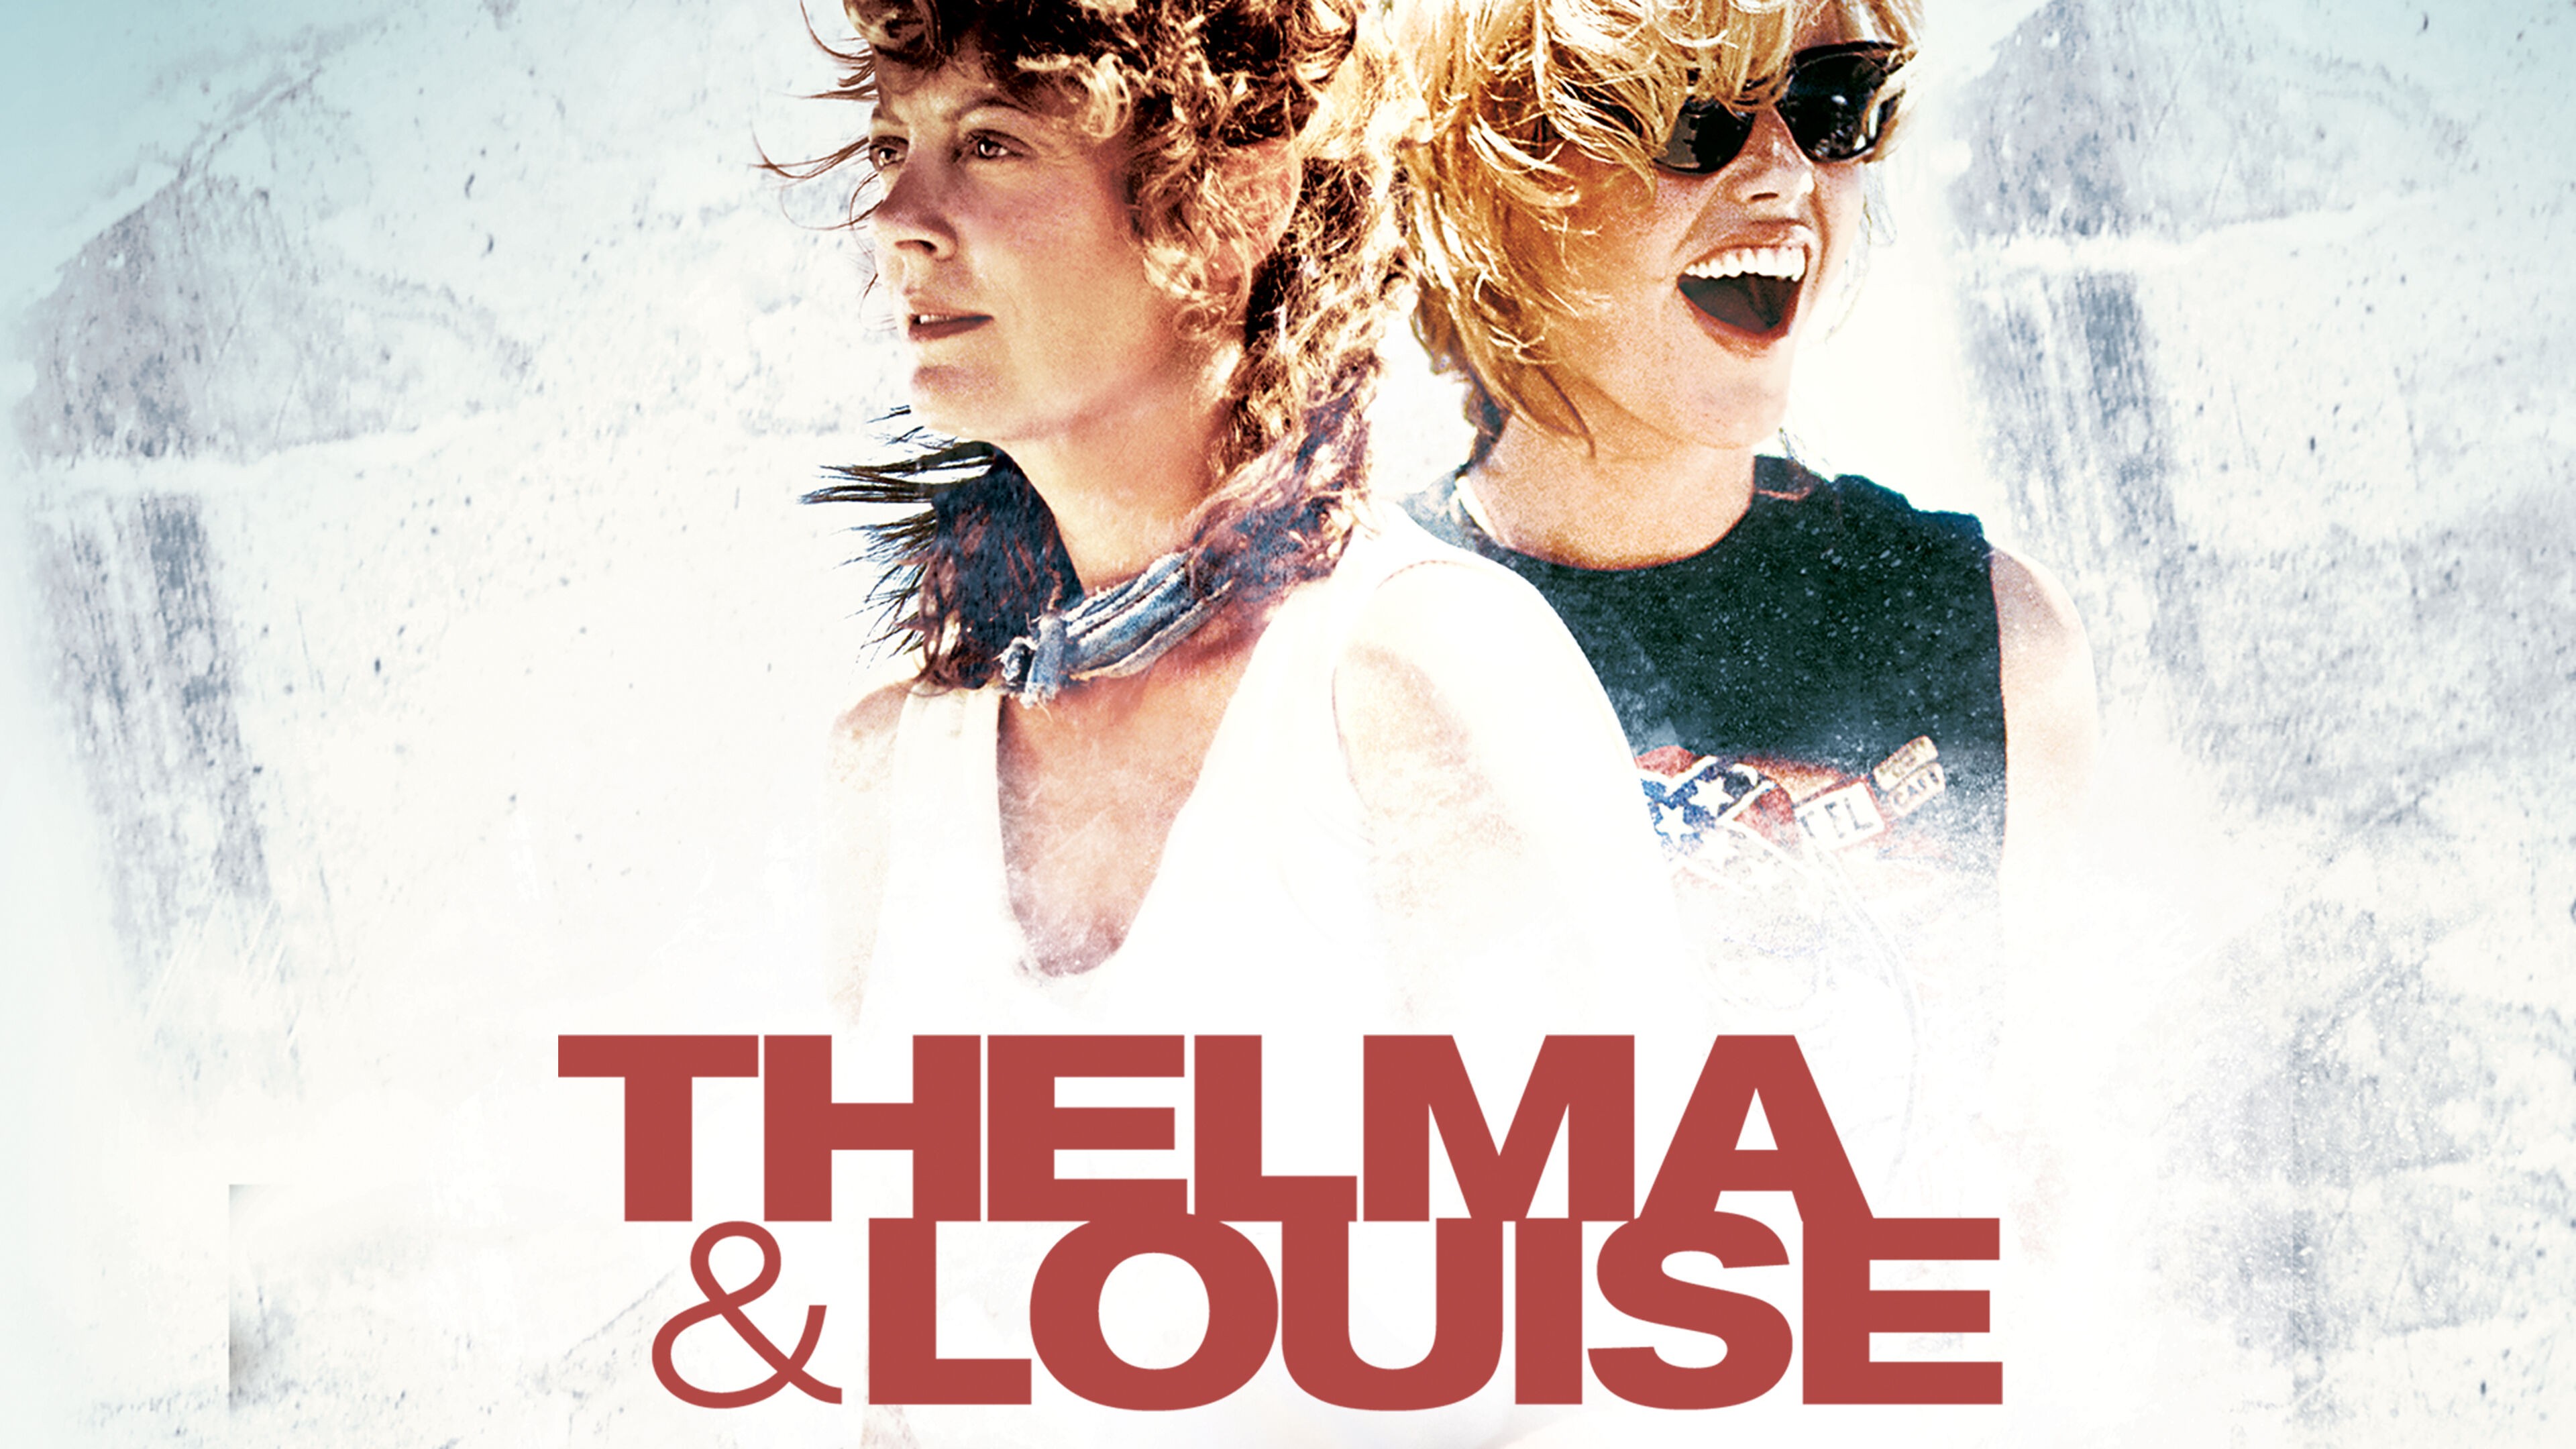 Thelma & Louise 20 Years Later